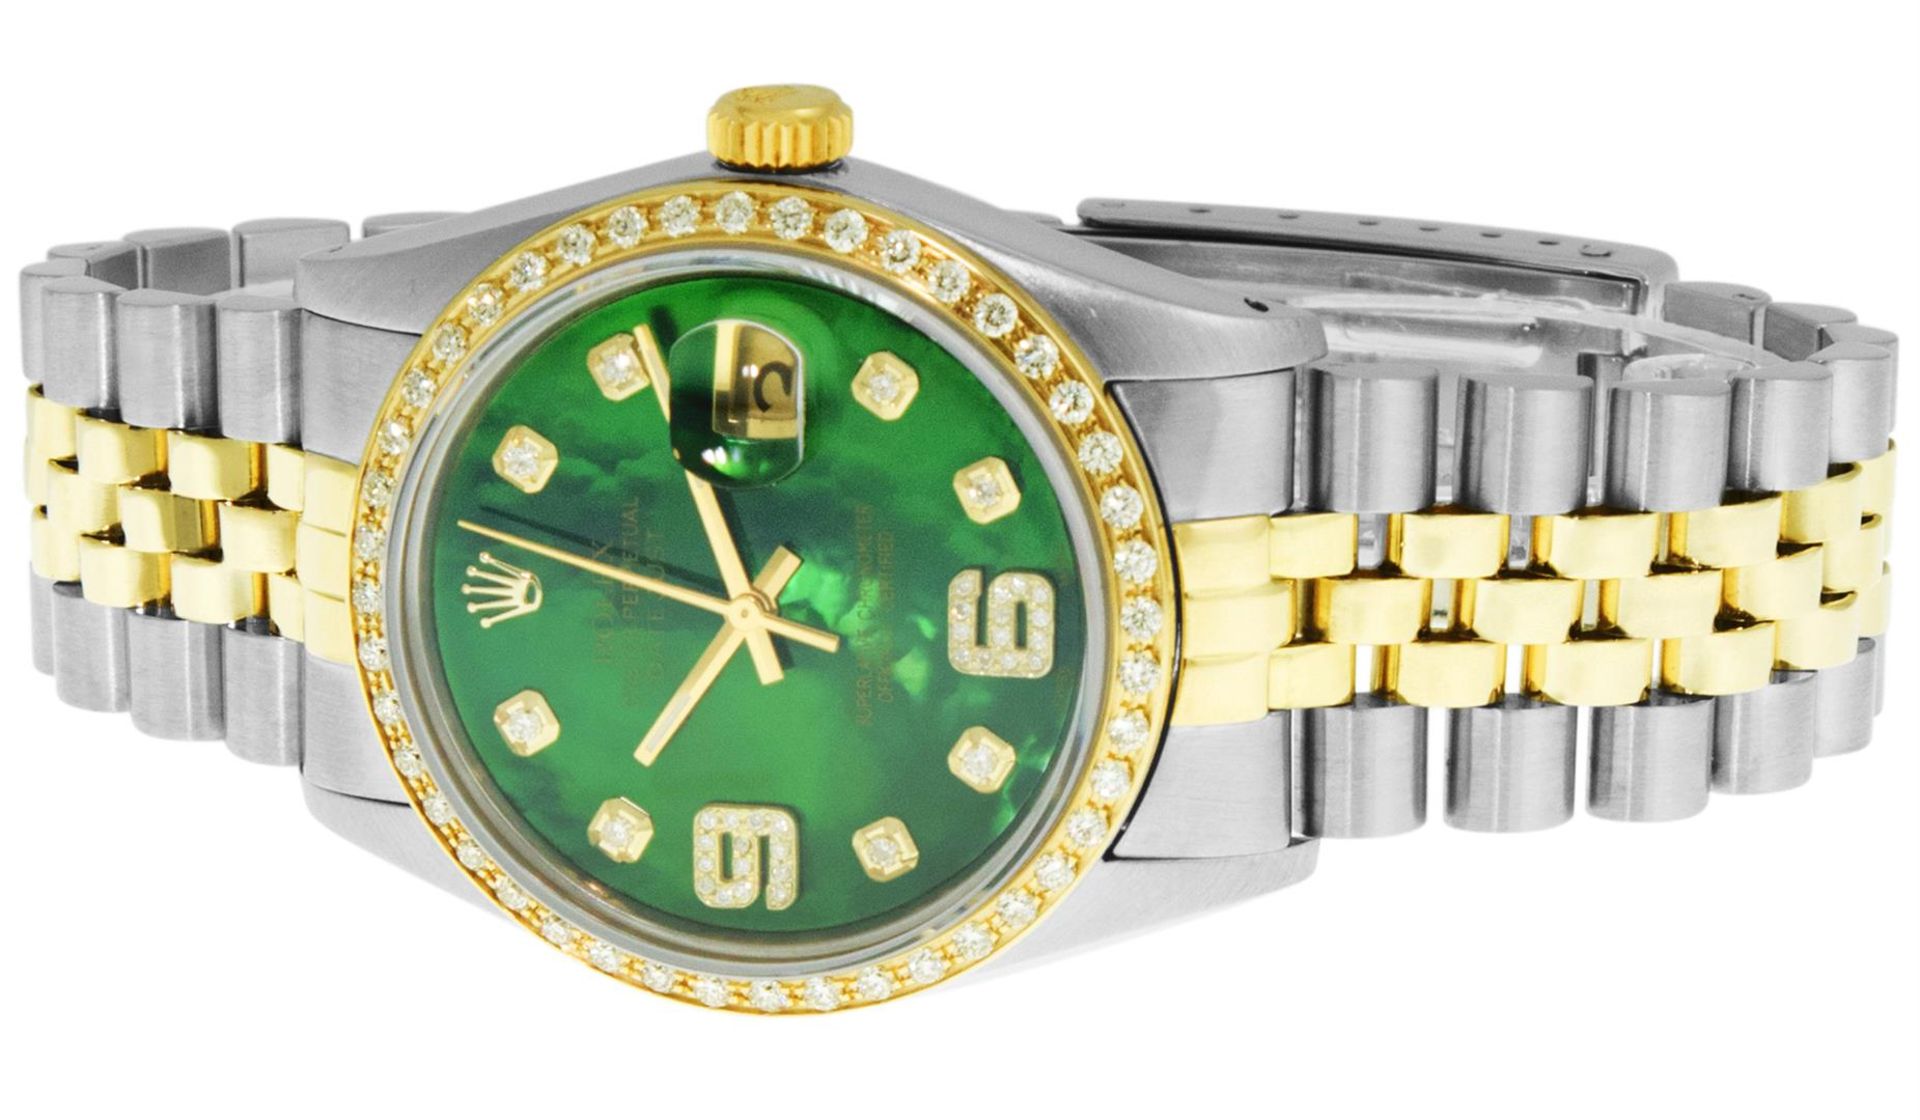 Rolex 2 Tone YG/SS Green Diamond Oyster Perpetual Datejust Wristwatch 36MM - Image 2 of 9